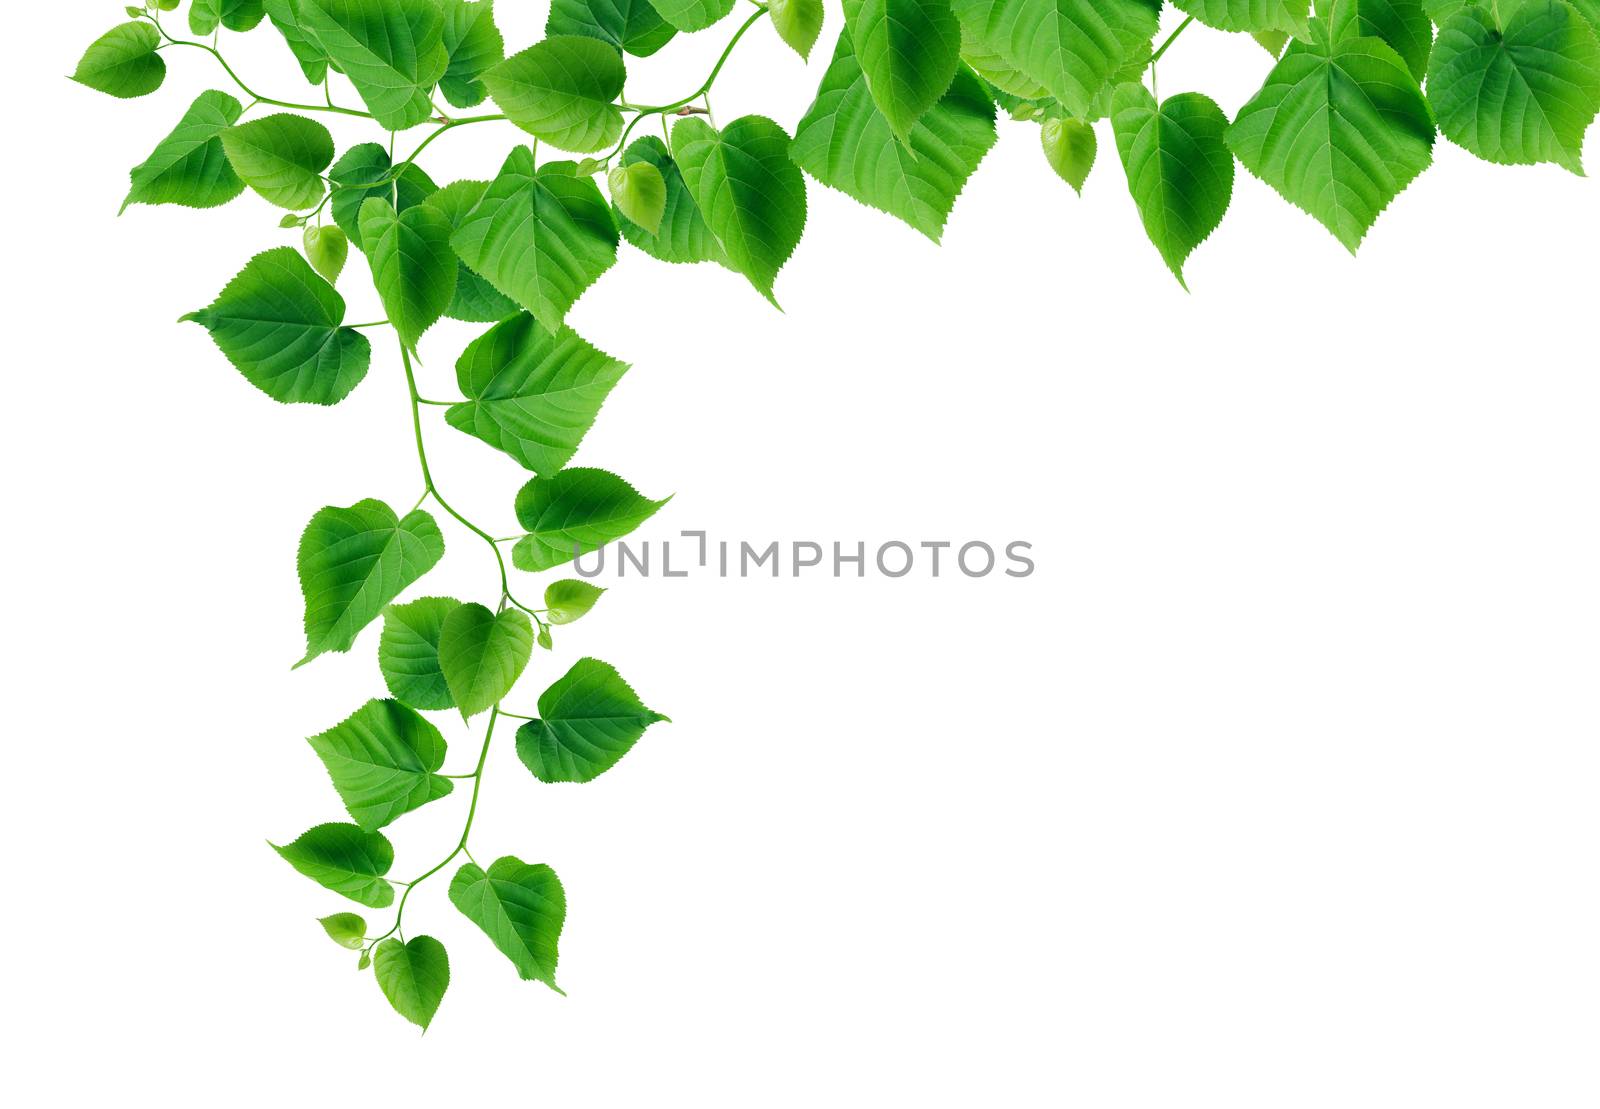 Nice green ivy in bloom as border on white background